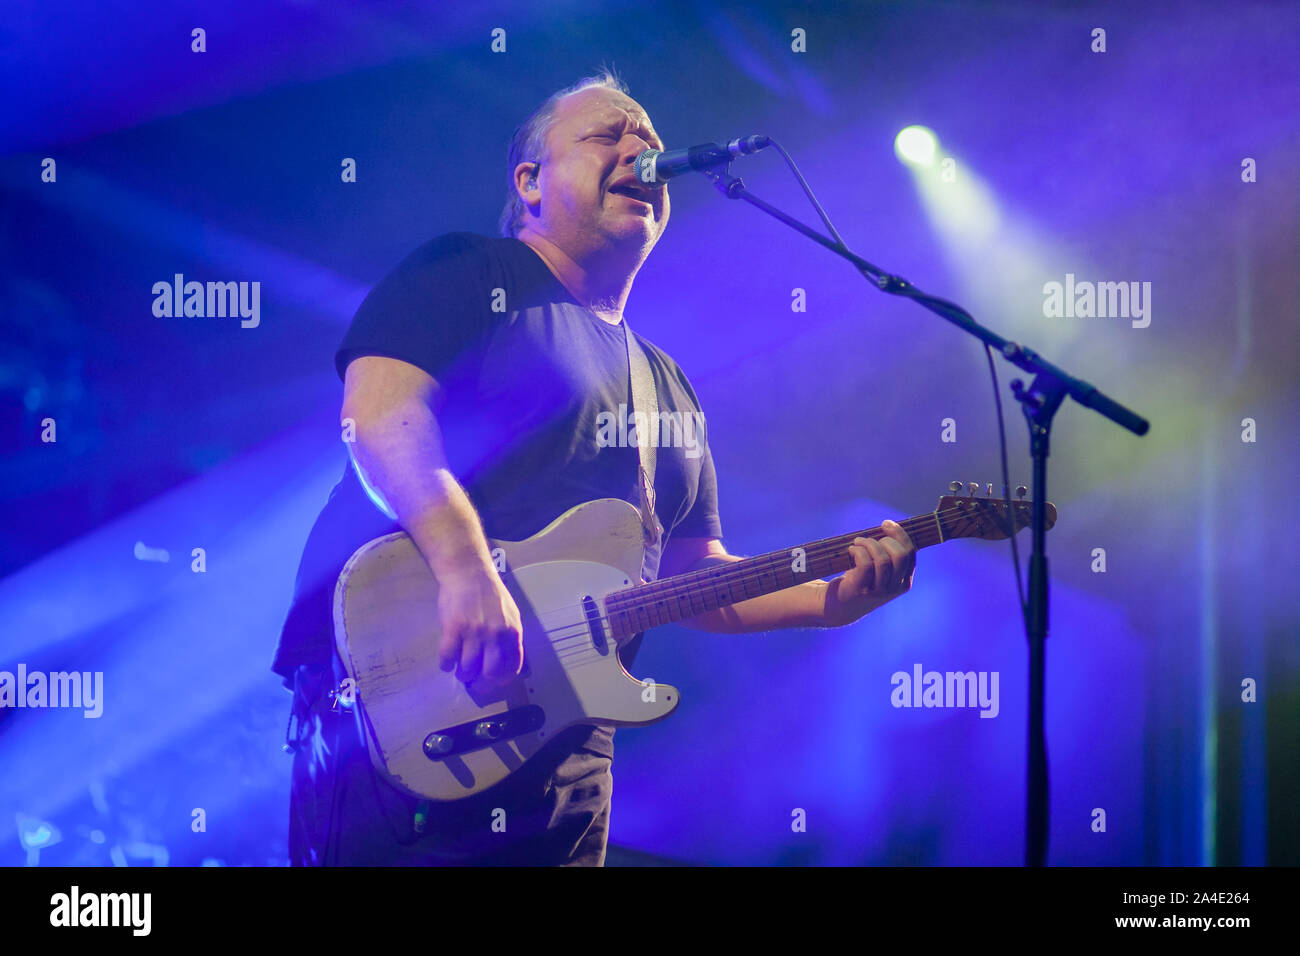 Turin, Italy October 12 2019 legendary band Pixies perform live in Turin Stock Photo